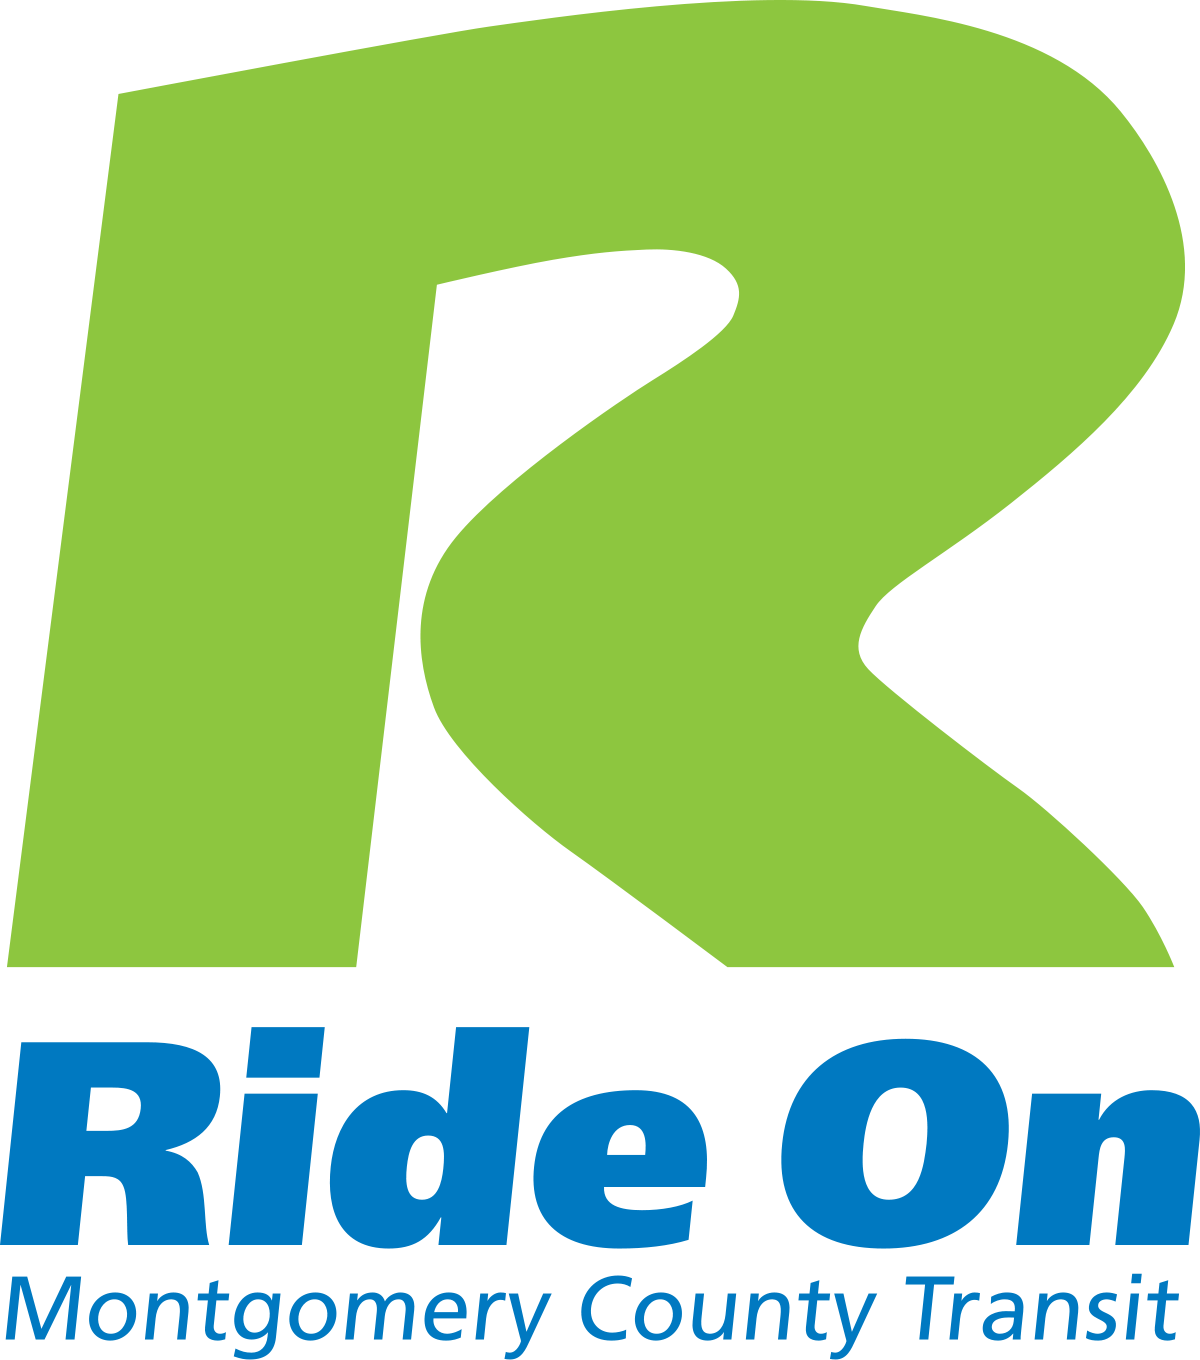 https://upload.wikimedia.org/wikipedia/commons/thumb/7/71/Ride_On_logo.svg/1200px-Ride_On_logo.svg.png